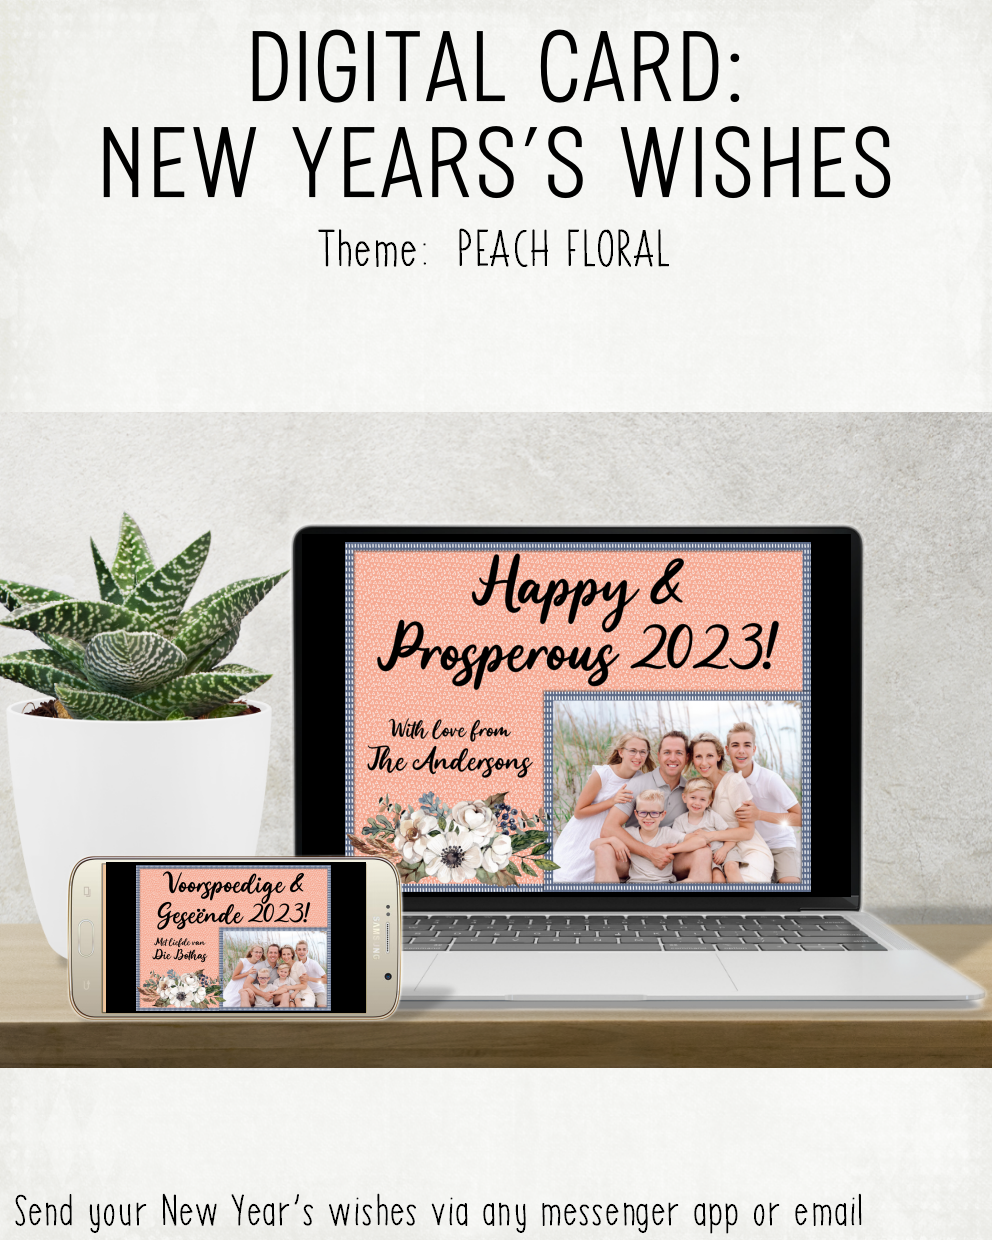 DIGITAL CARD: New Year's Wishes - Peach Floral (Afrikaans & English)